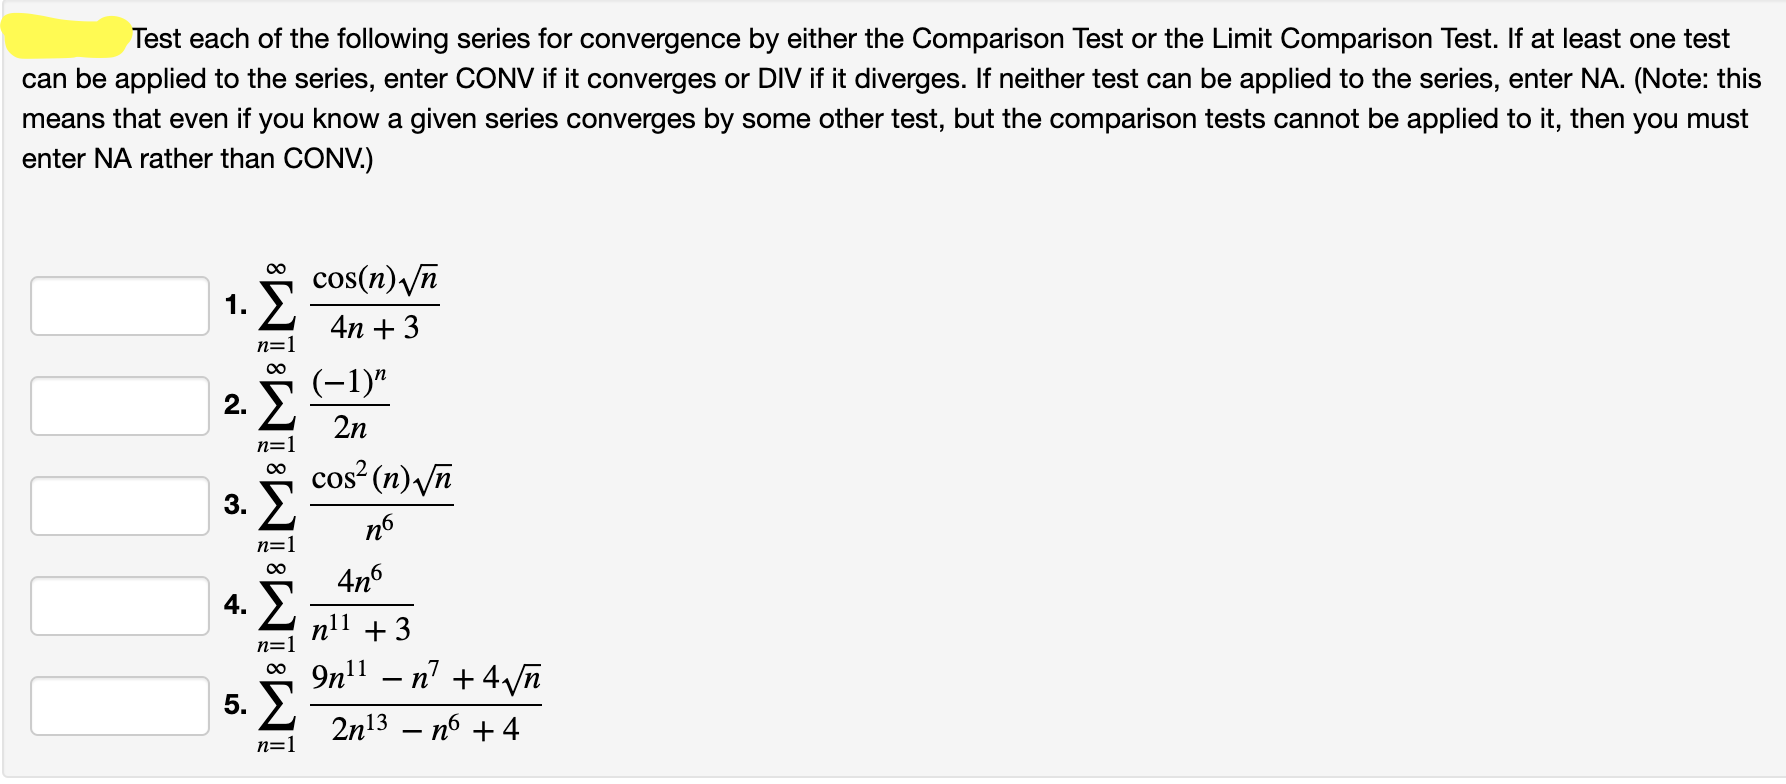 Test each of the following series for convergence by either the Comparison Test or the Limit Comparison Test. If at least one test
can be applied to the series, enter CONV if it converges or DIV if it diverges. If neither test can be applied to the series, enter NA. (Note: this
means that even if you know a given series converges by some other test, but the comparison tests cannot be applied to it, then you must
enter NA rather than CONV.)
cos(n) /n
4n + 3
n=1
(-1)"
2.
2n
cos? (n) /n
3.
п6
n=1
4n6
n11 +3
n=1
9n'1 – n' + 4/n
5.
2n13 – nó + 4
n=1
